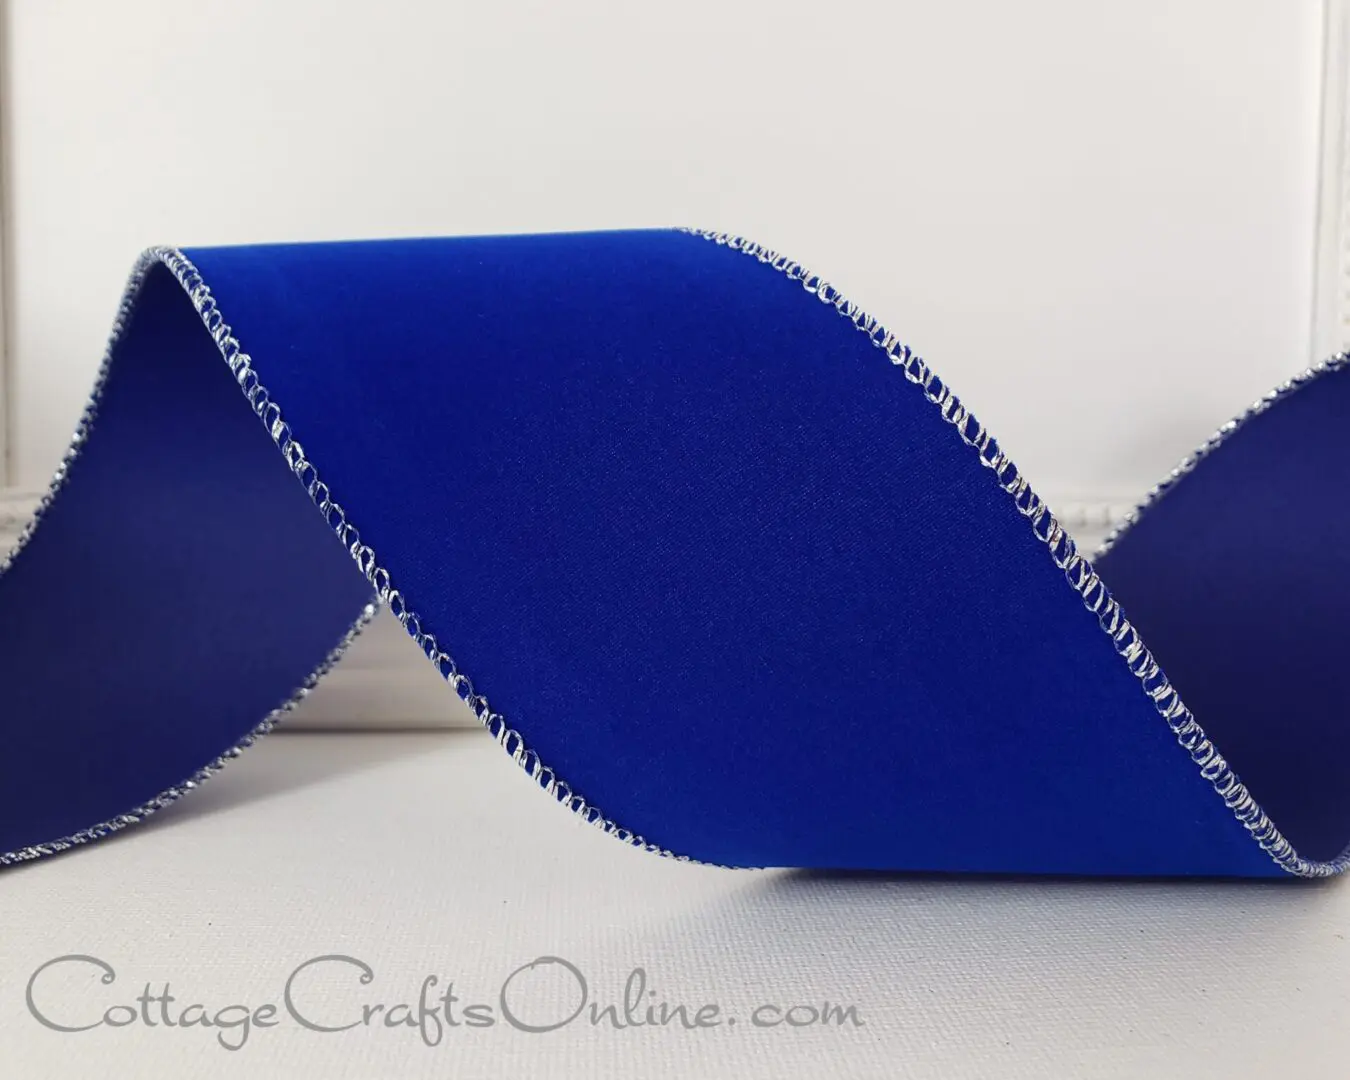 Velvet finish royal blue silver edge 2.5" wide wired ribbon from the Etsy shop of Cottage Crafts Online.